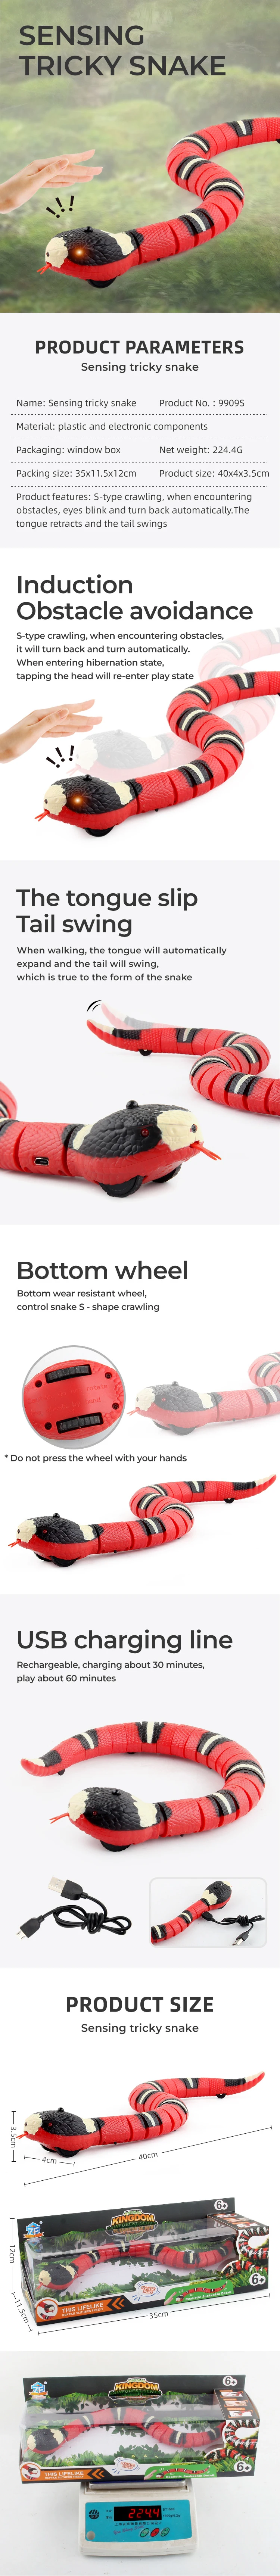 Funny Electric Creative Smart Sensing Cat Toys Electric Snake Automatic USB Rechargeable Realistic Pet Toy